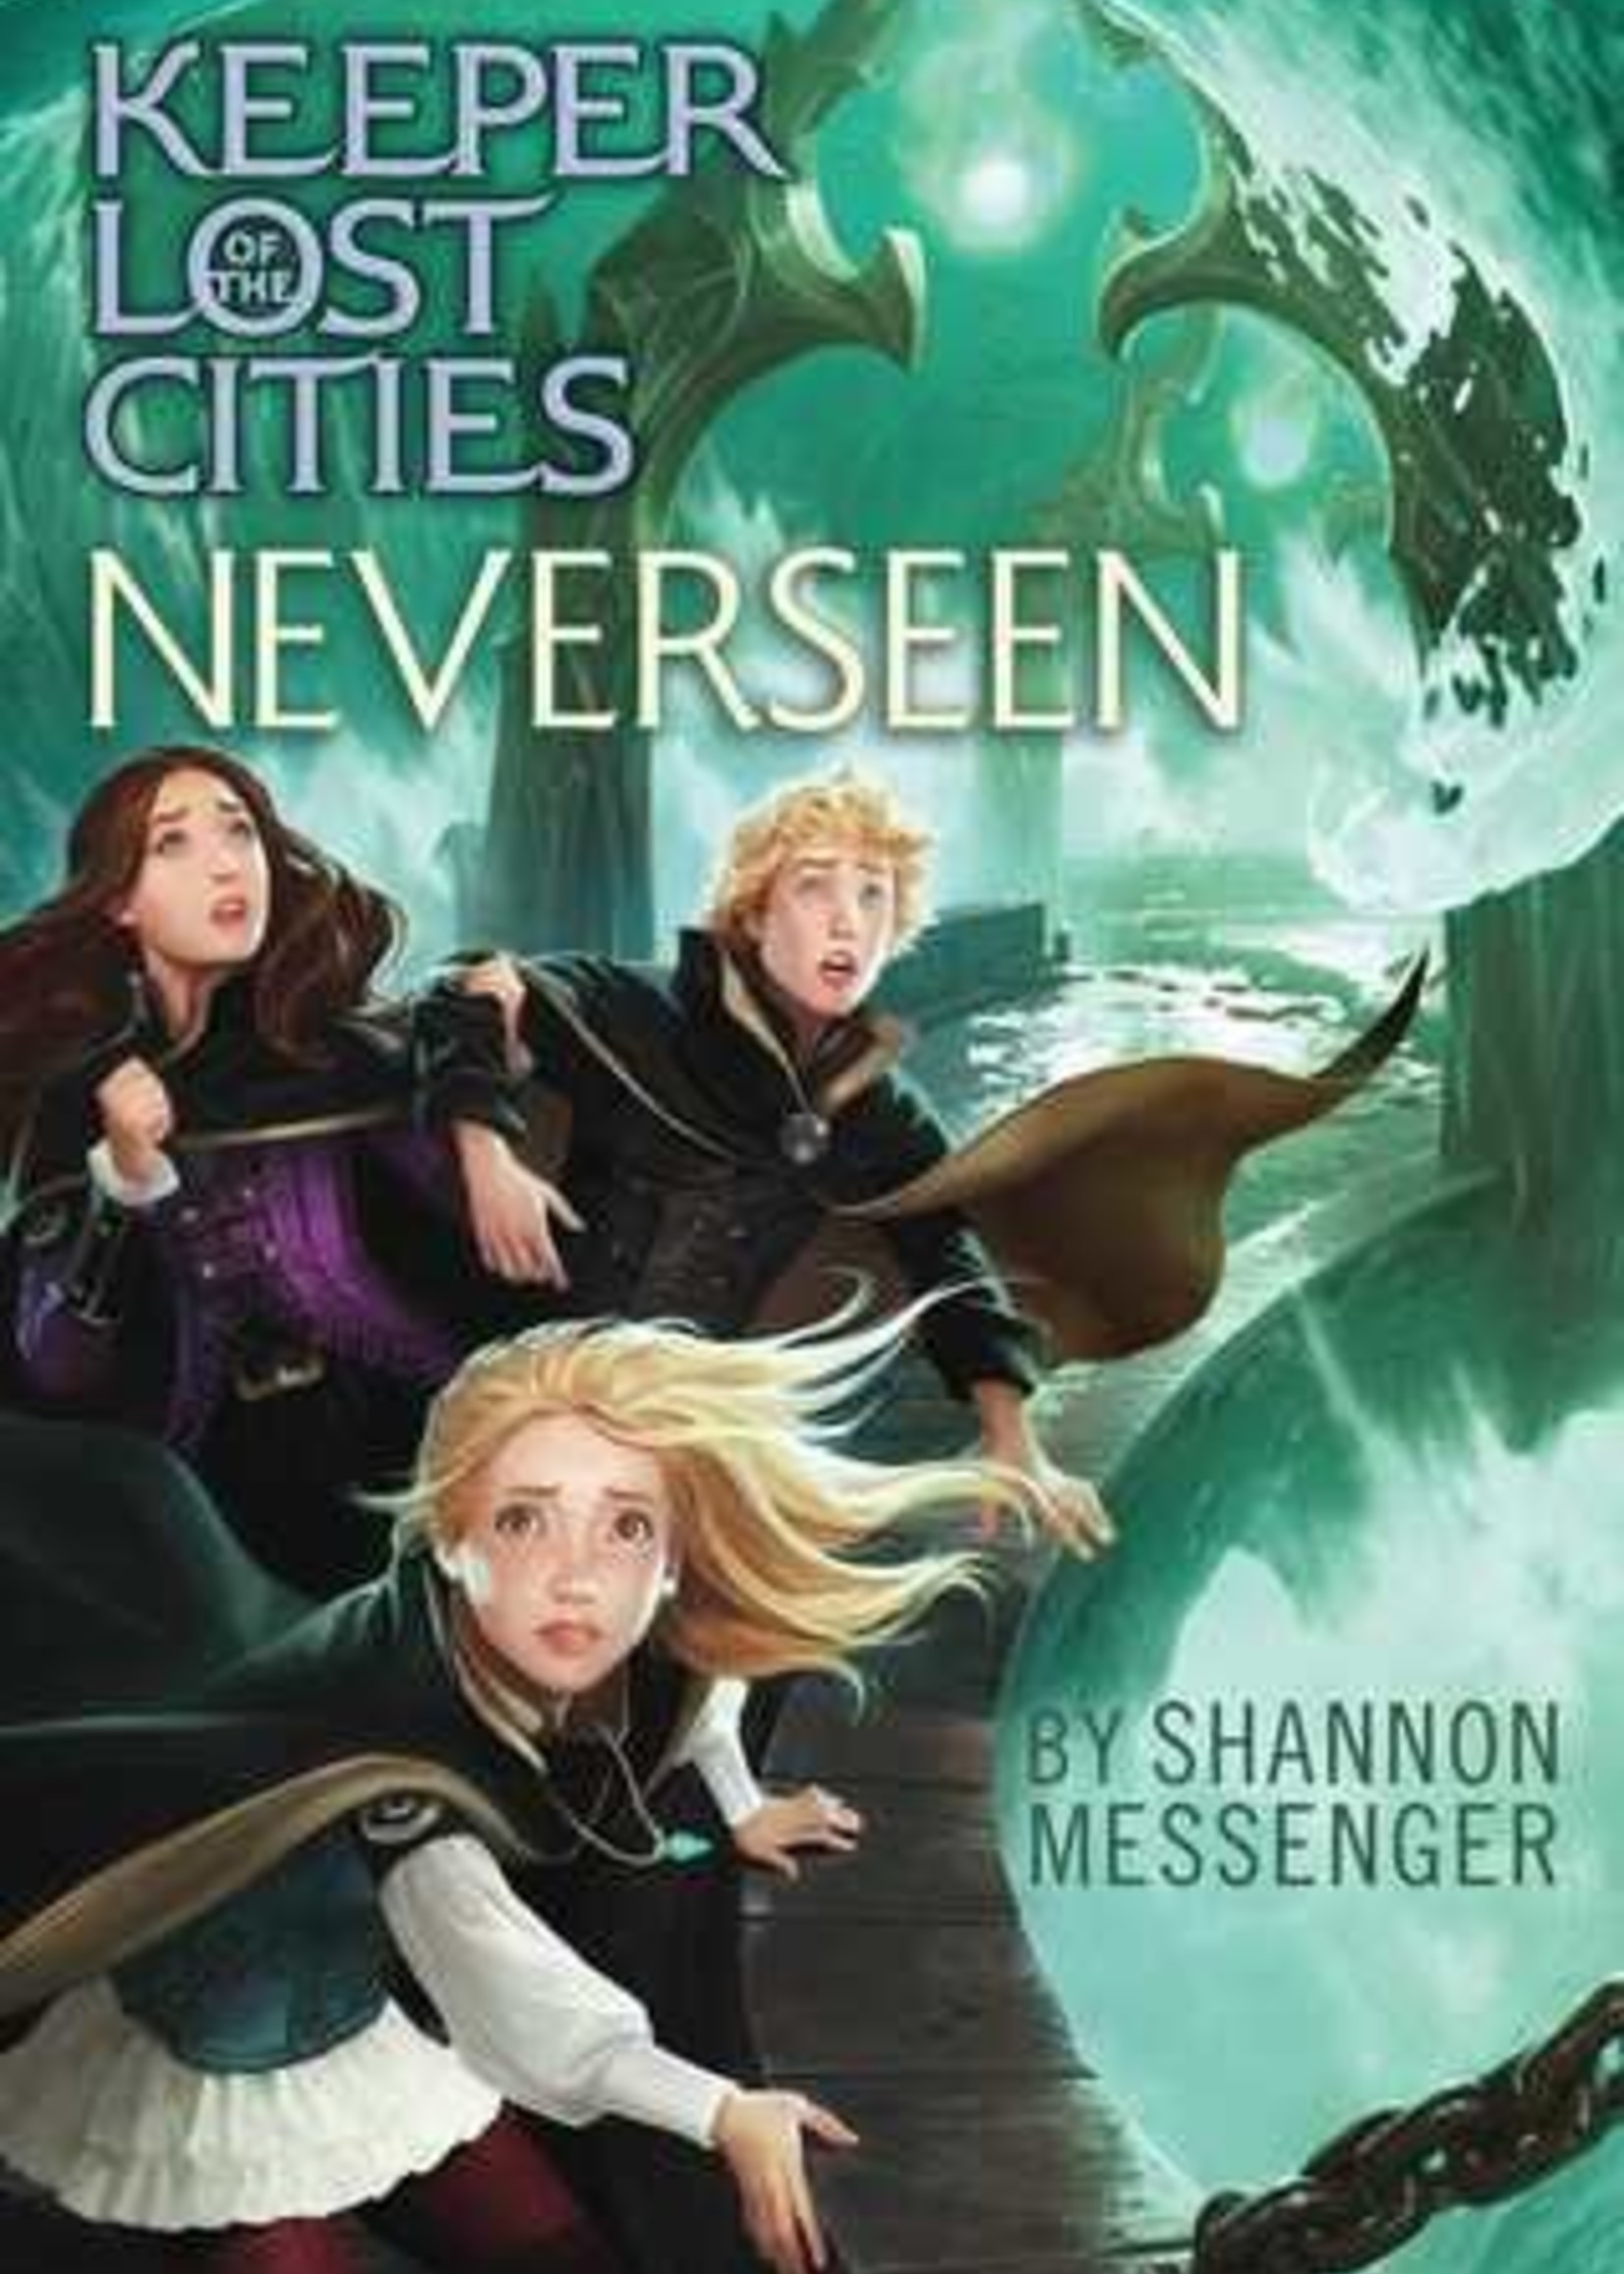 Neverseen (Keeper of the Lost Cities #4) by Shannon Messenger